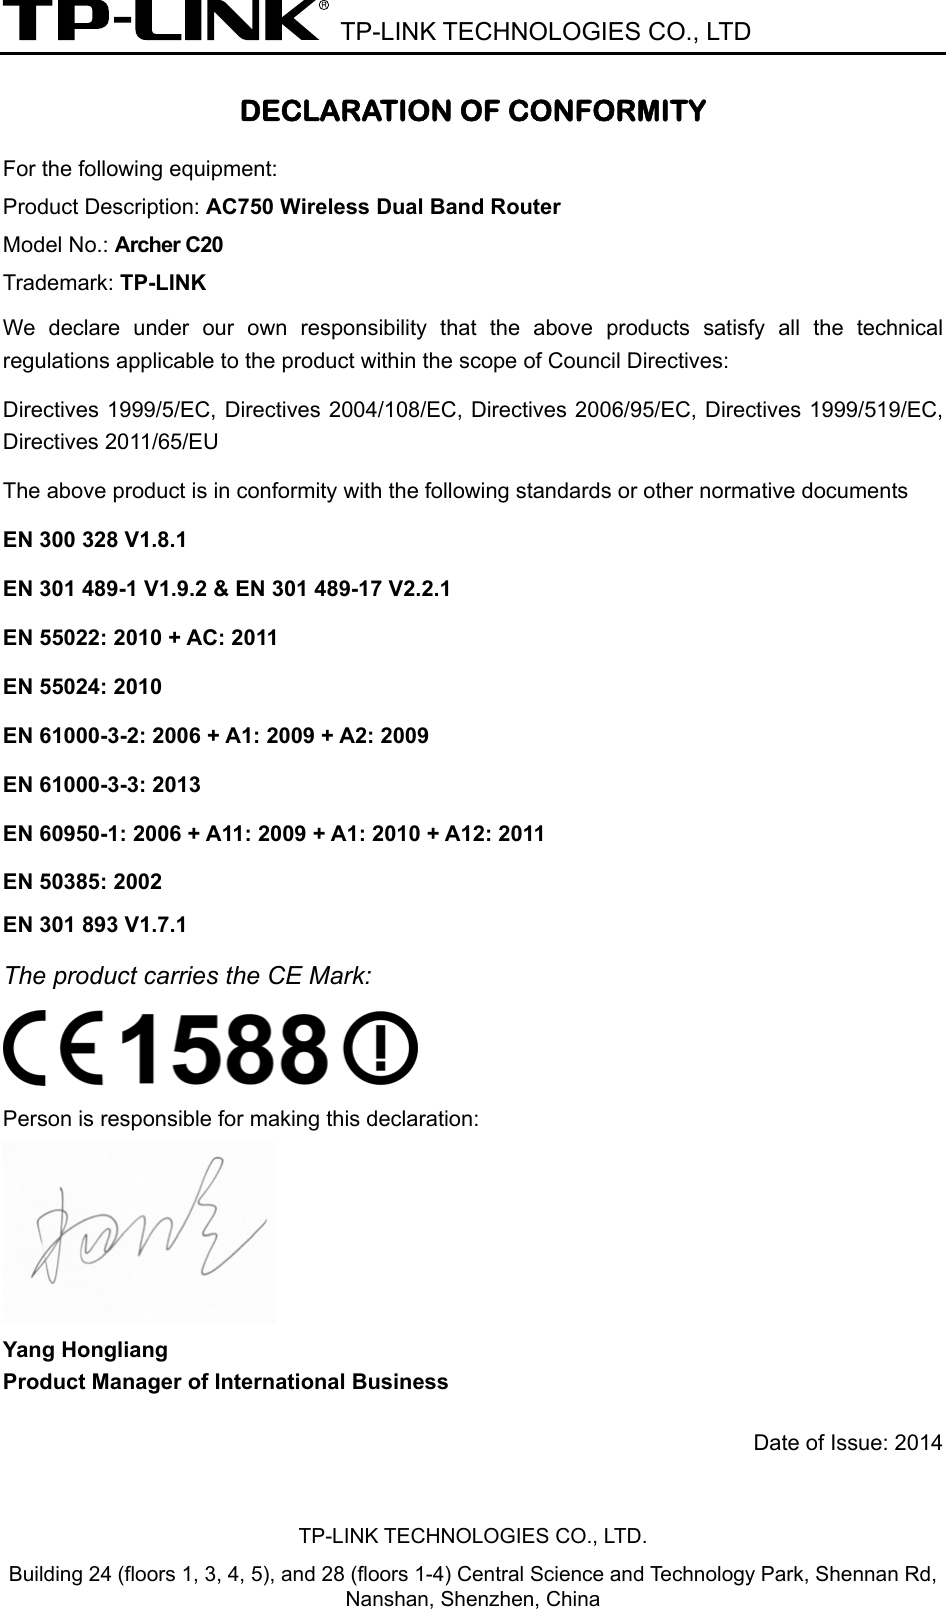  TP-LINK TECHNOLOGIES CO., LTD DECLARATION OF CONFORMITY For the following equipment: Product Description: AC750 Wireless Dual Band Router Model No.: Archer C20 Trademark: TP-LINK We declare under our own responsibility that the above products satisfy all the technical regulations applicable to the product within the scope of Council Directives:     Directives 1999/5/EC, Directives 2004/108/EC, Directives 2006/95/EC, Directives 1999/519/EC, Directives 2011/65/EU The above product is in conformity with the following standards or other normative documents EN 300 328 V1.8.1     EN 301 489-1 V1.9.2 &amp; EN 301 489-17 V2.2.1     EN 55022: 2010 + AC: 2011 EN 55024: 2010 EN 61000-3-2: 2006 + A1: 2009 + A2: 2009 EN 61000-3-3: 2013 EN 60950-1: 2006 + A11: 2009 + A1: 2010 + A12: 2011     EN 50385: 2002     EN 301 893 V1.7.1 The product carries the CE Mark:   Person is responsible for making this declaration:  Yang Hongliang Product Manager of International Business   Date of Issue: 2014 TP-LINK TECHNOLOGIES CO., LTD. Building 24 (floors 1, 3, 4, 5), and 28 (floors 1-4) Central Science and Technology Park, Shennan Rd, Nanshan, Shenzhen, China 